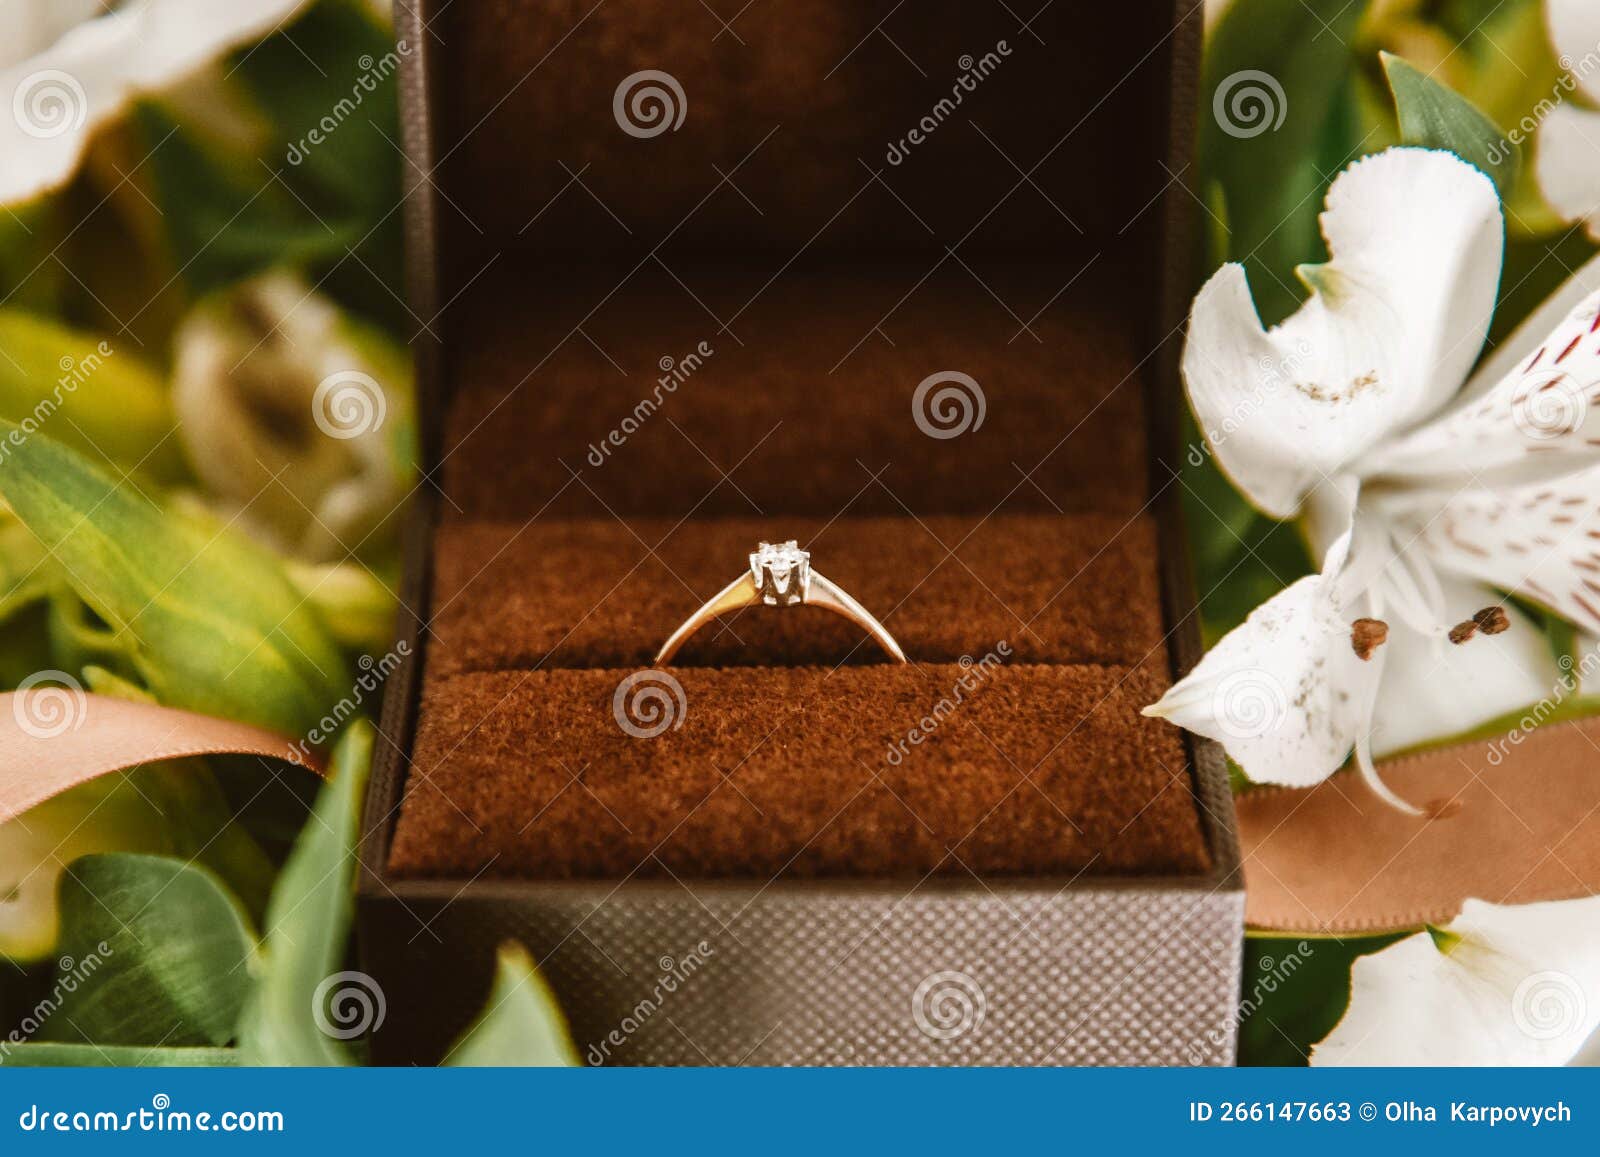 Wedding Ring in a Box Close-up, Gold Ring with a Diamond in Flowers ...